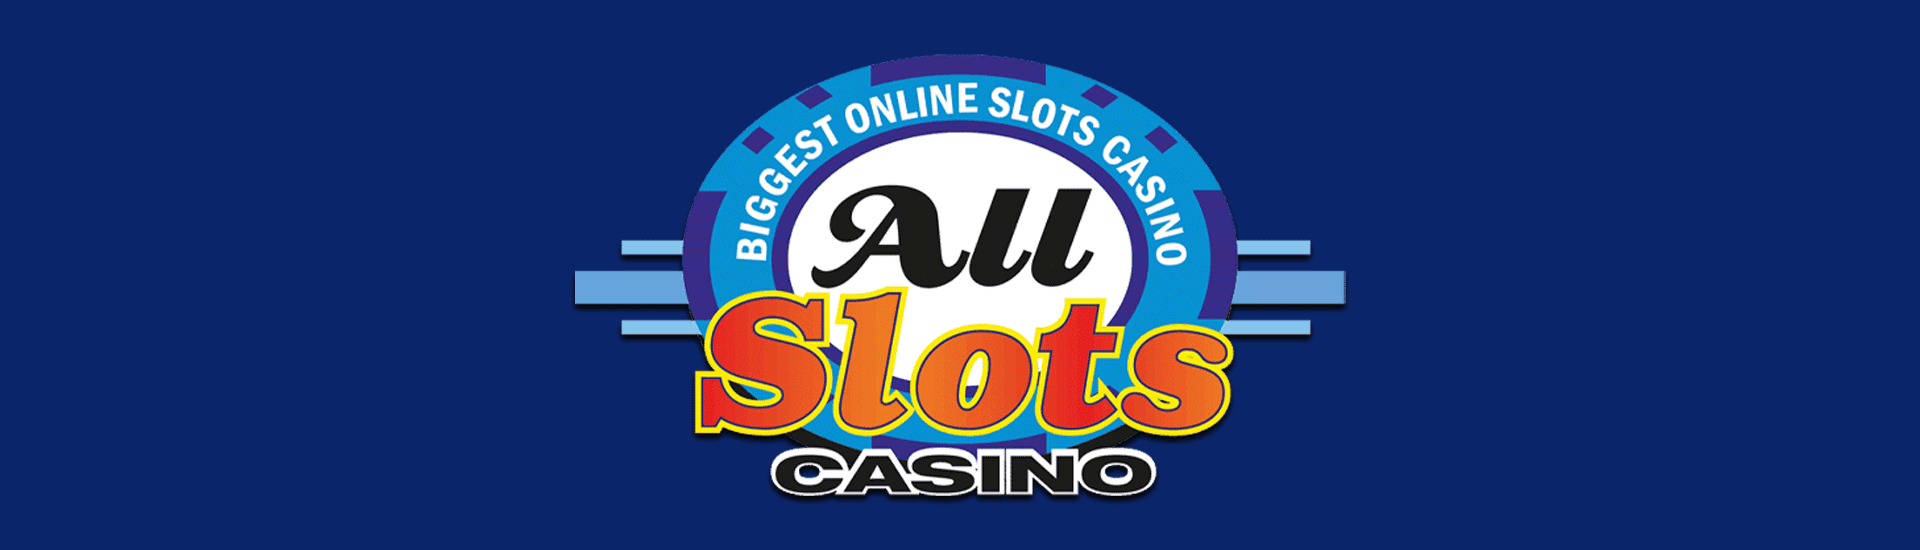 All Slots Casino Featured Image